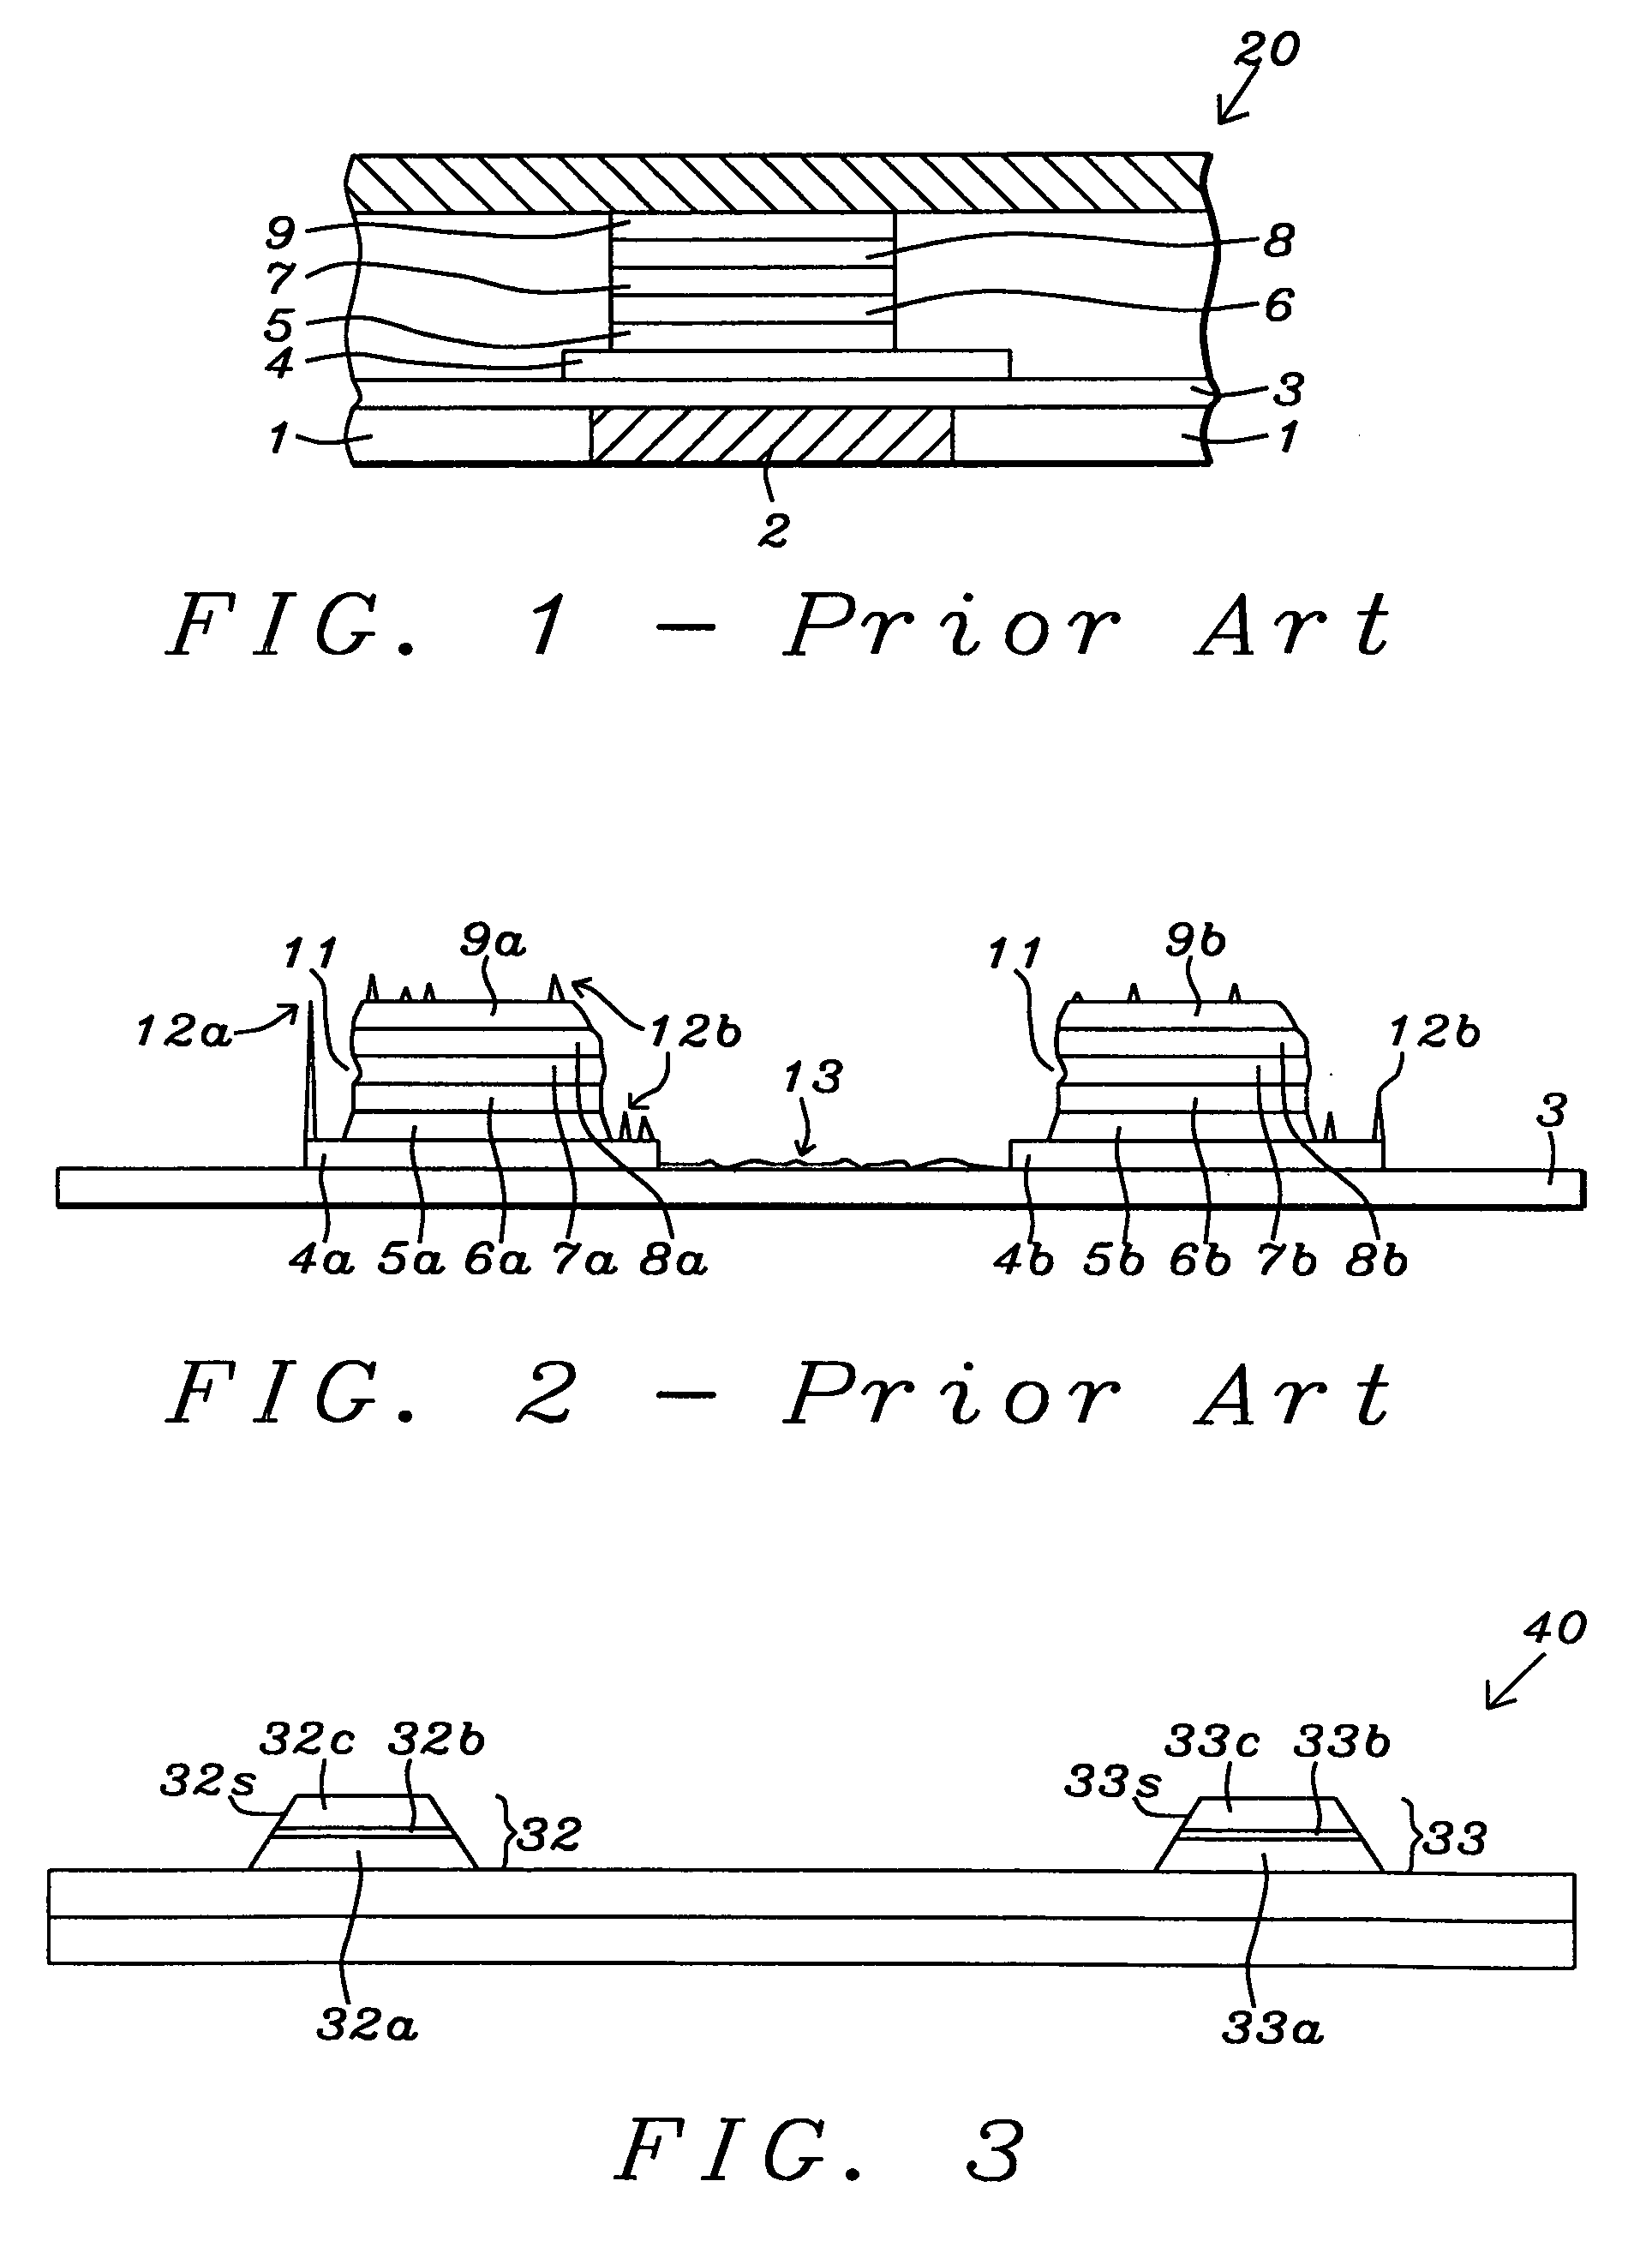 Bottom electrode etching process in MRAM cell